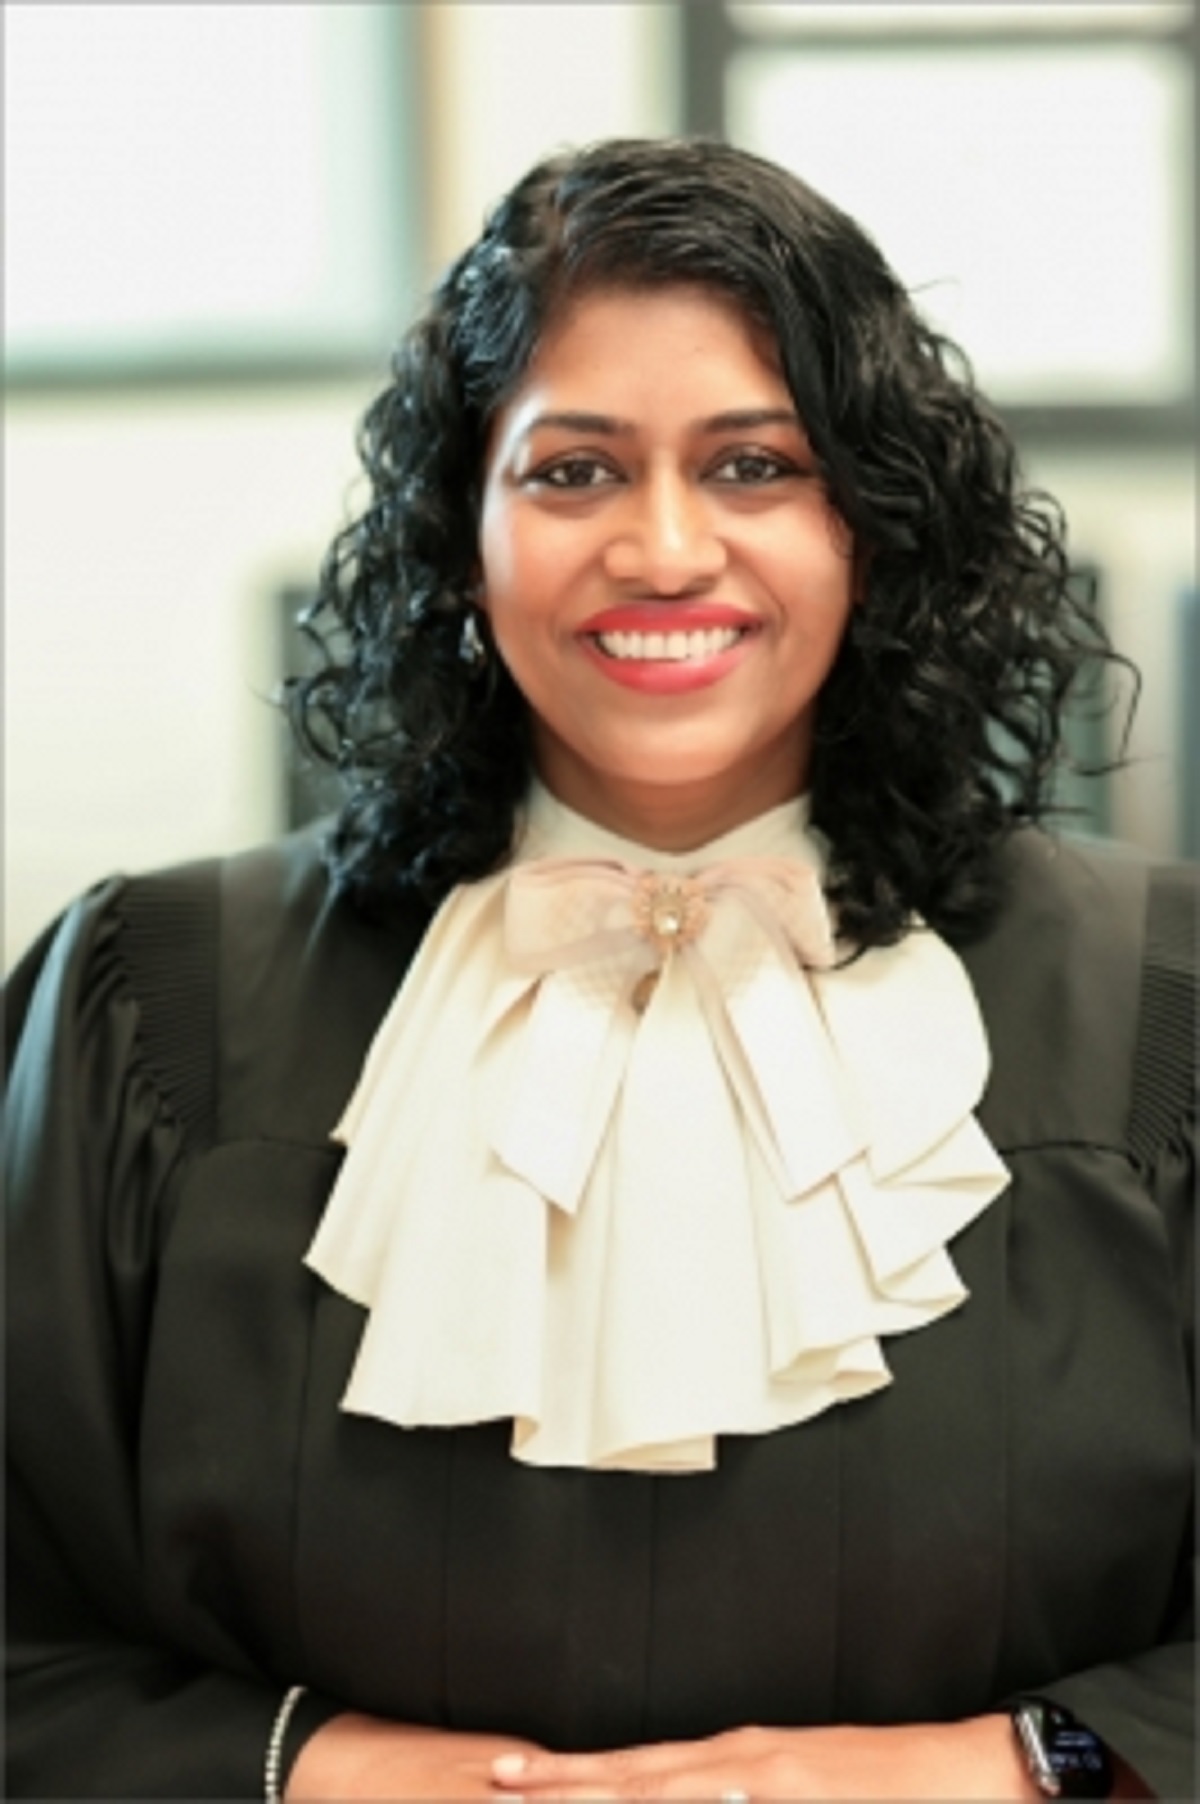 Indian-American takes oath as Texas county judge